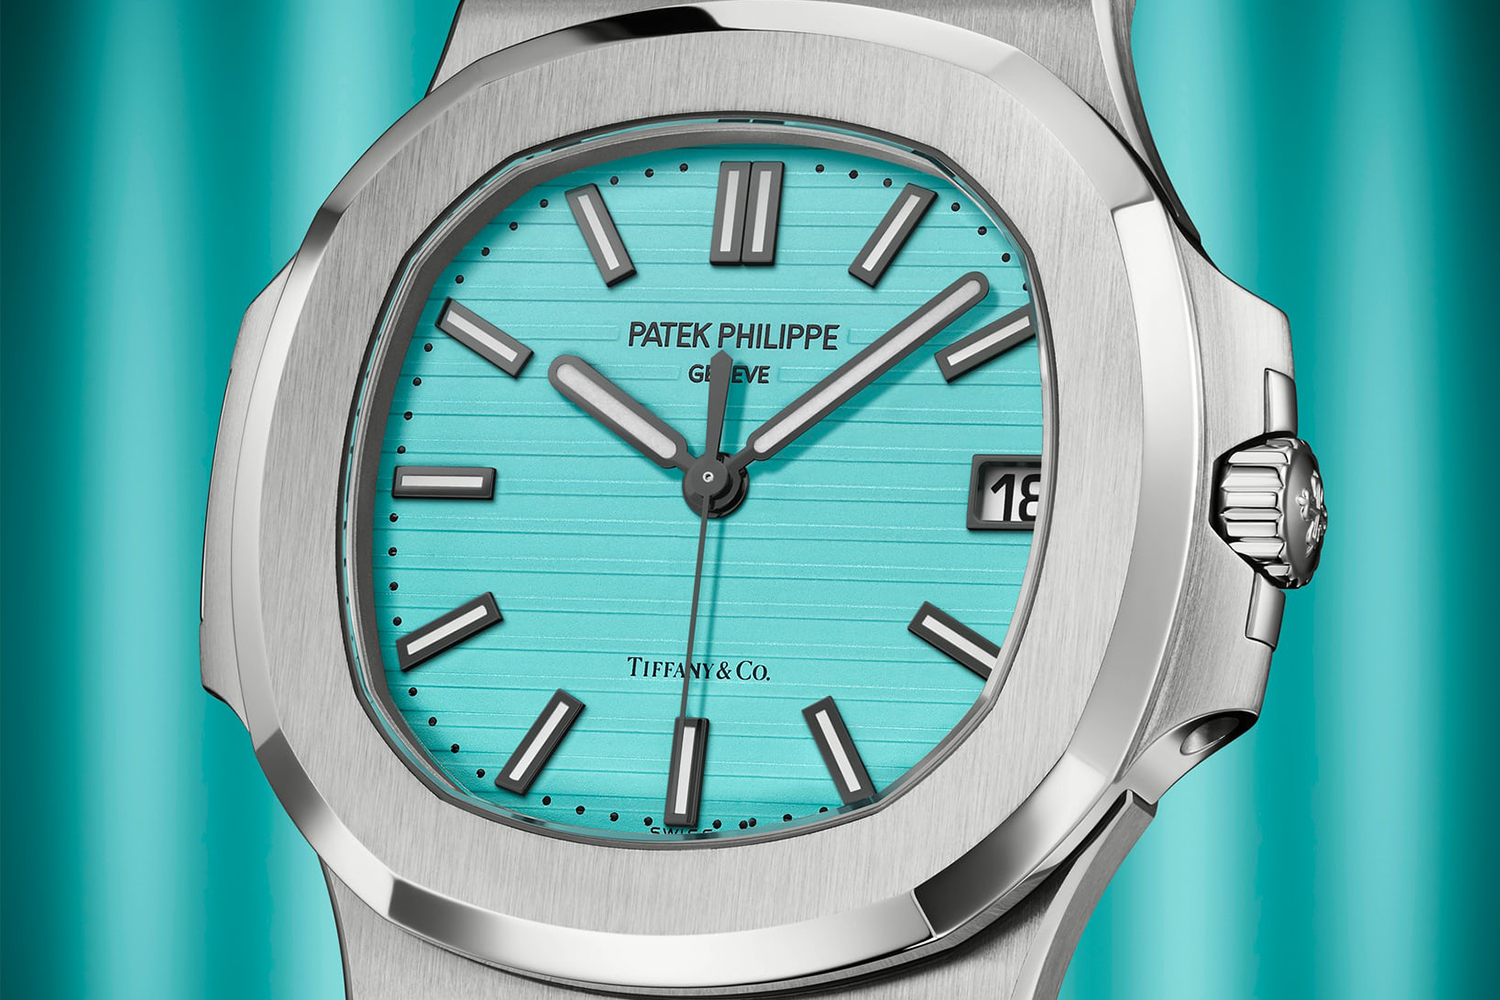 A close-up of the Tiffany Blue dial on the Patek Philippe Nautilus ref. 5711 that was made in collaboration with Tiffany & Co.